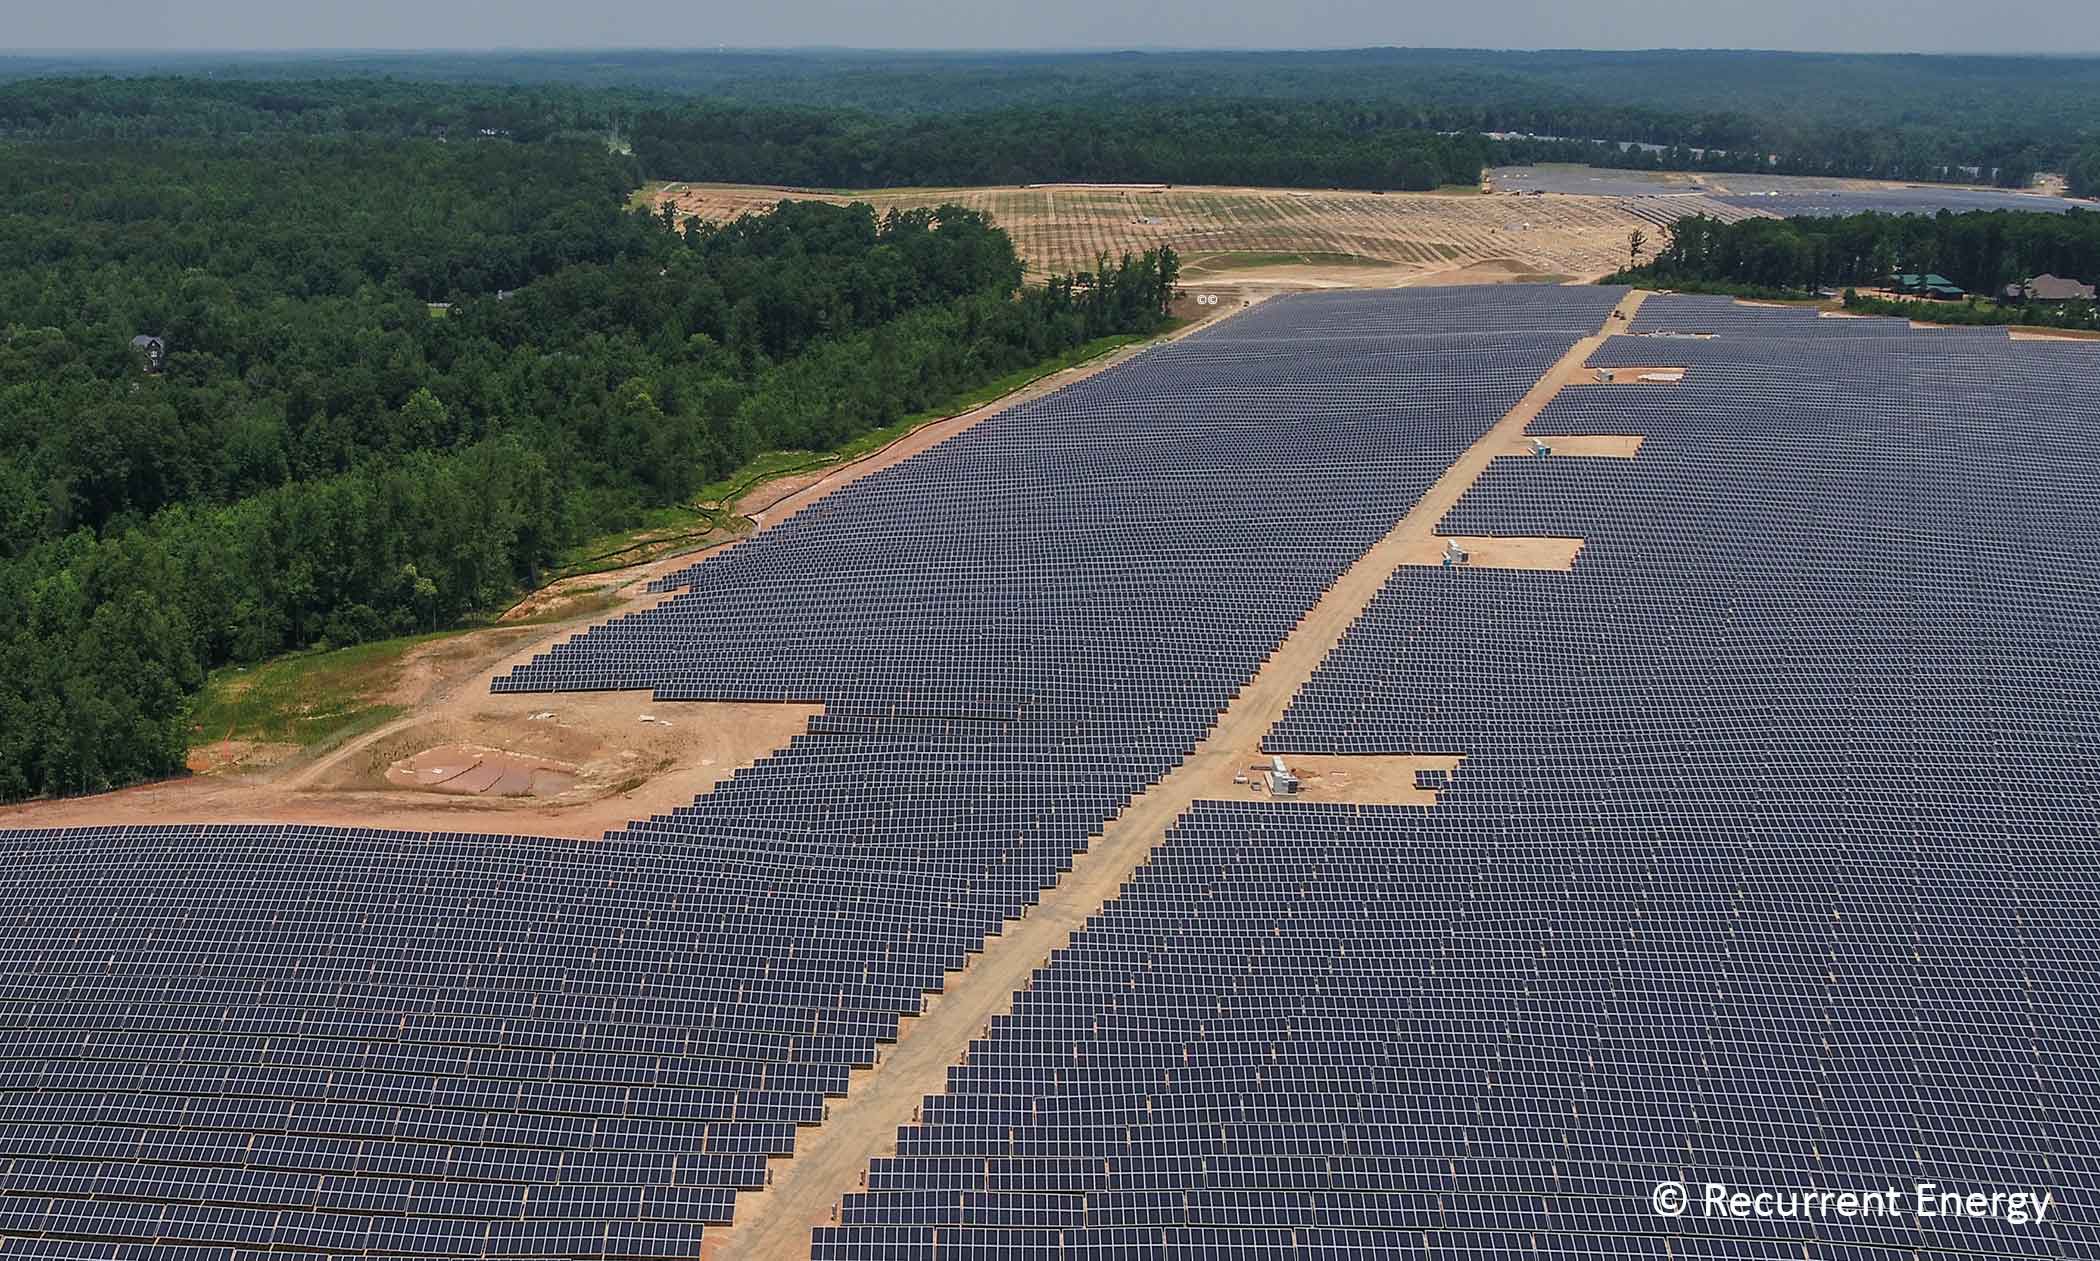 This solar site near Concord, N.C., was built by Recurrent Energy, Entergy Mississippi's partner in the planned 100 MW site in Sunflower County.